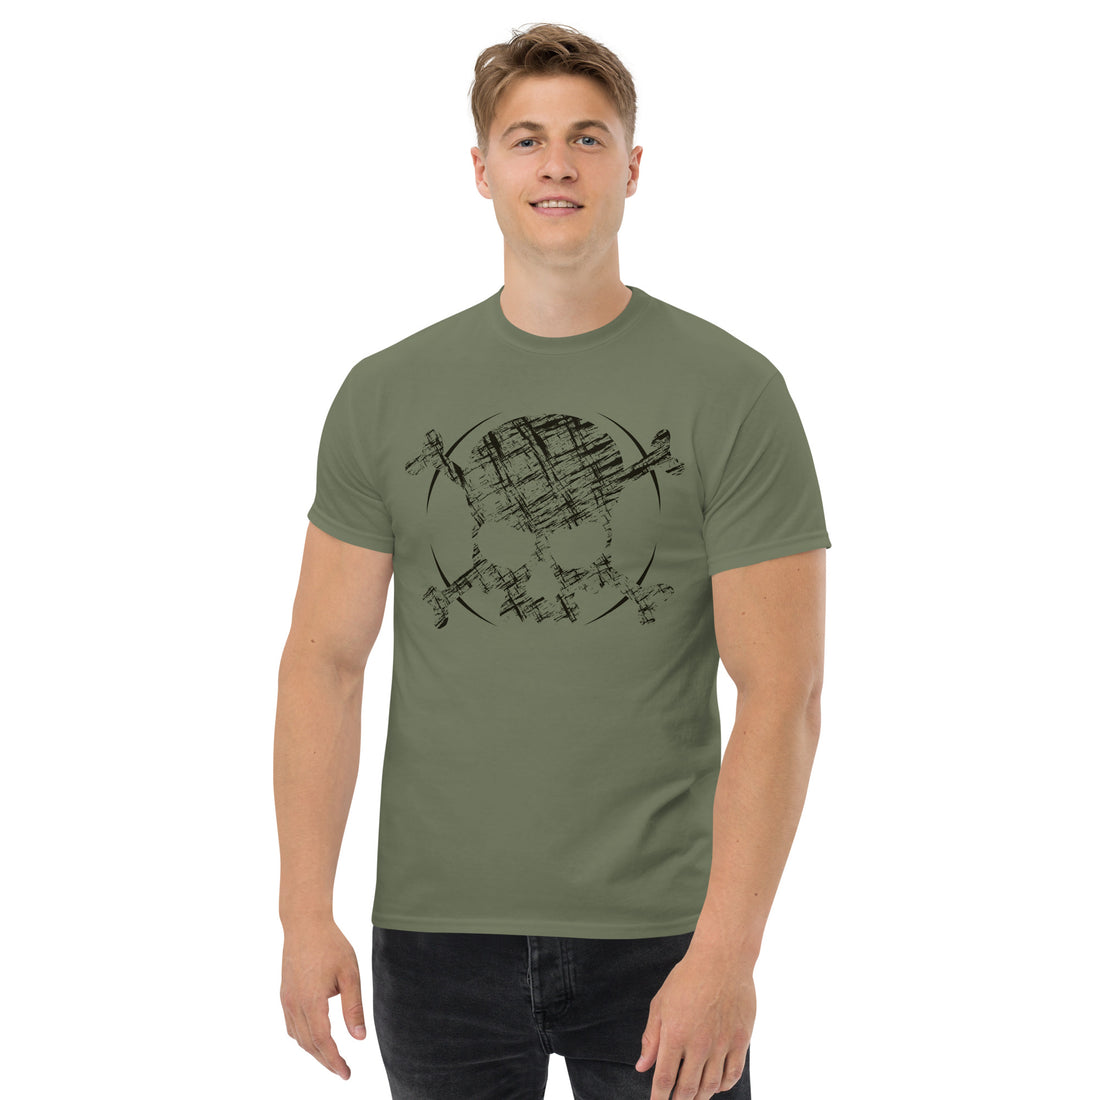 An attractive man is wearing a military green t-shirt adorned with roughly a cross-hatched skull and crossbones in black.  Solid black arcs give the image the impression of movement towards the end of the crossbones.